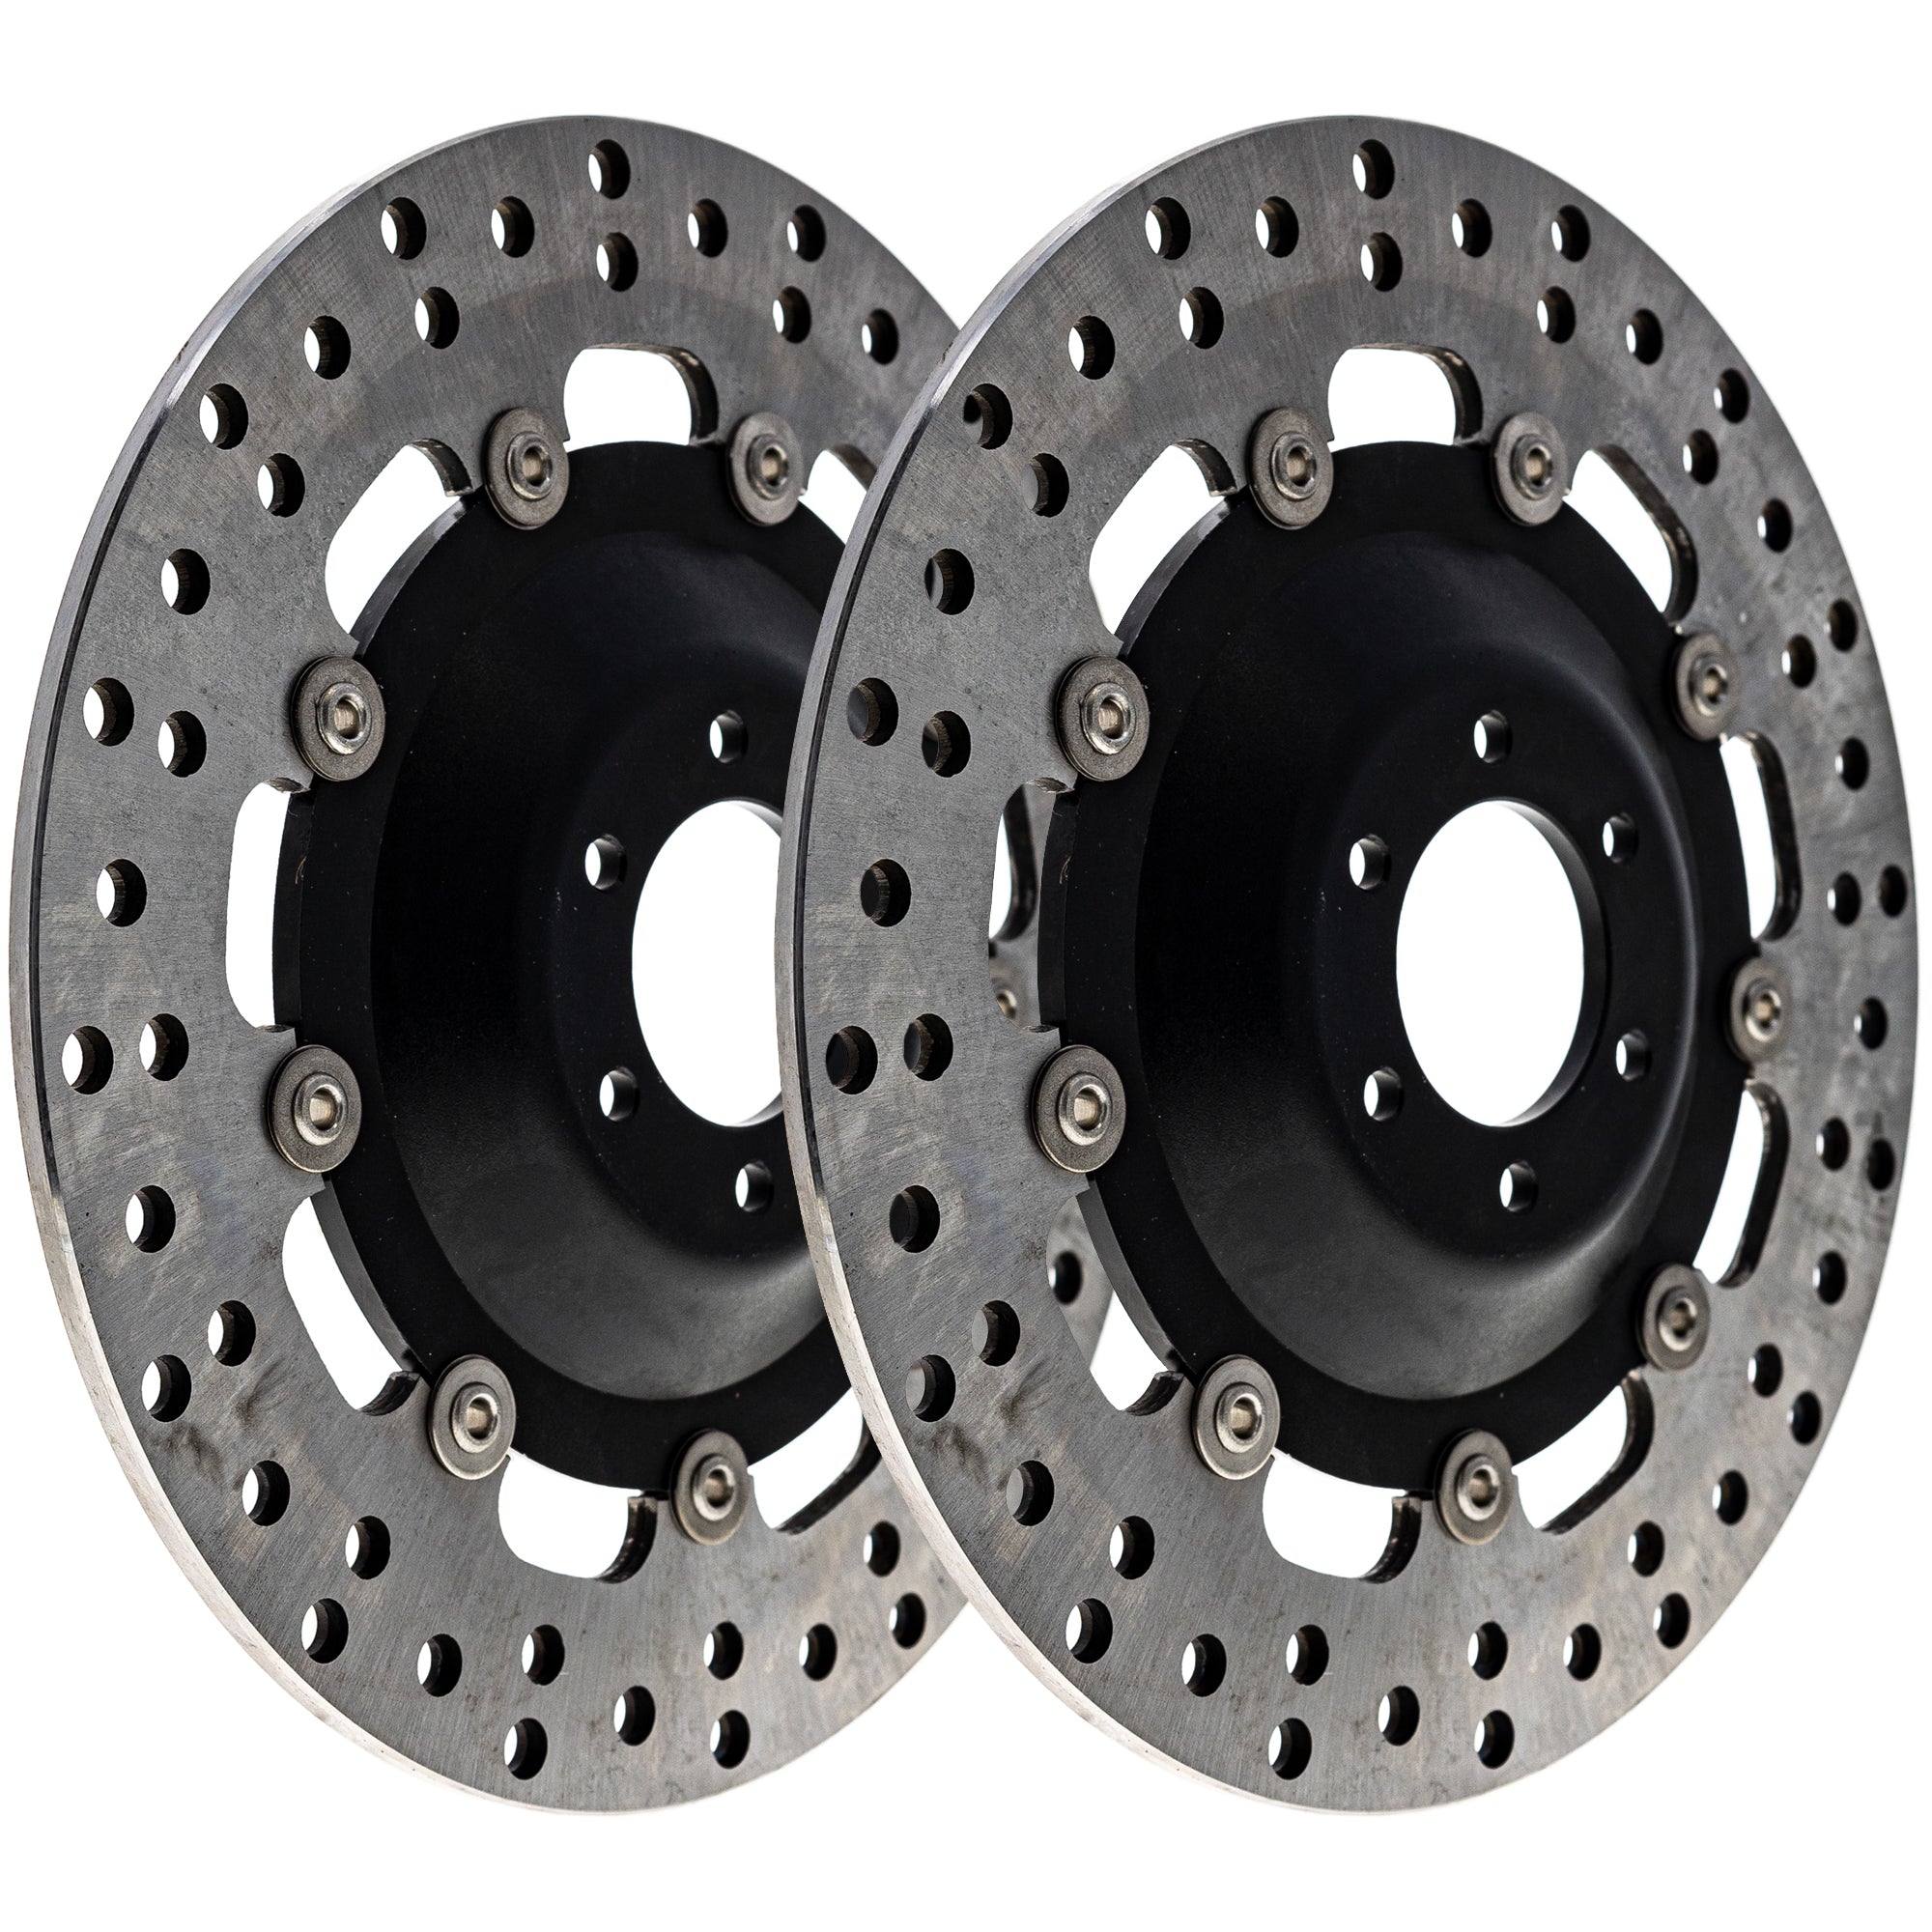 Front Brake Rotor 2-Pack for zOTHER GS750N GS750EN GS750EC GS750C NICHE 519-CRT2410R